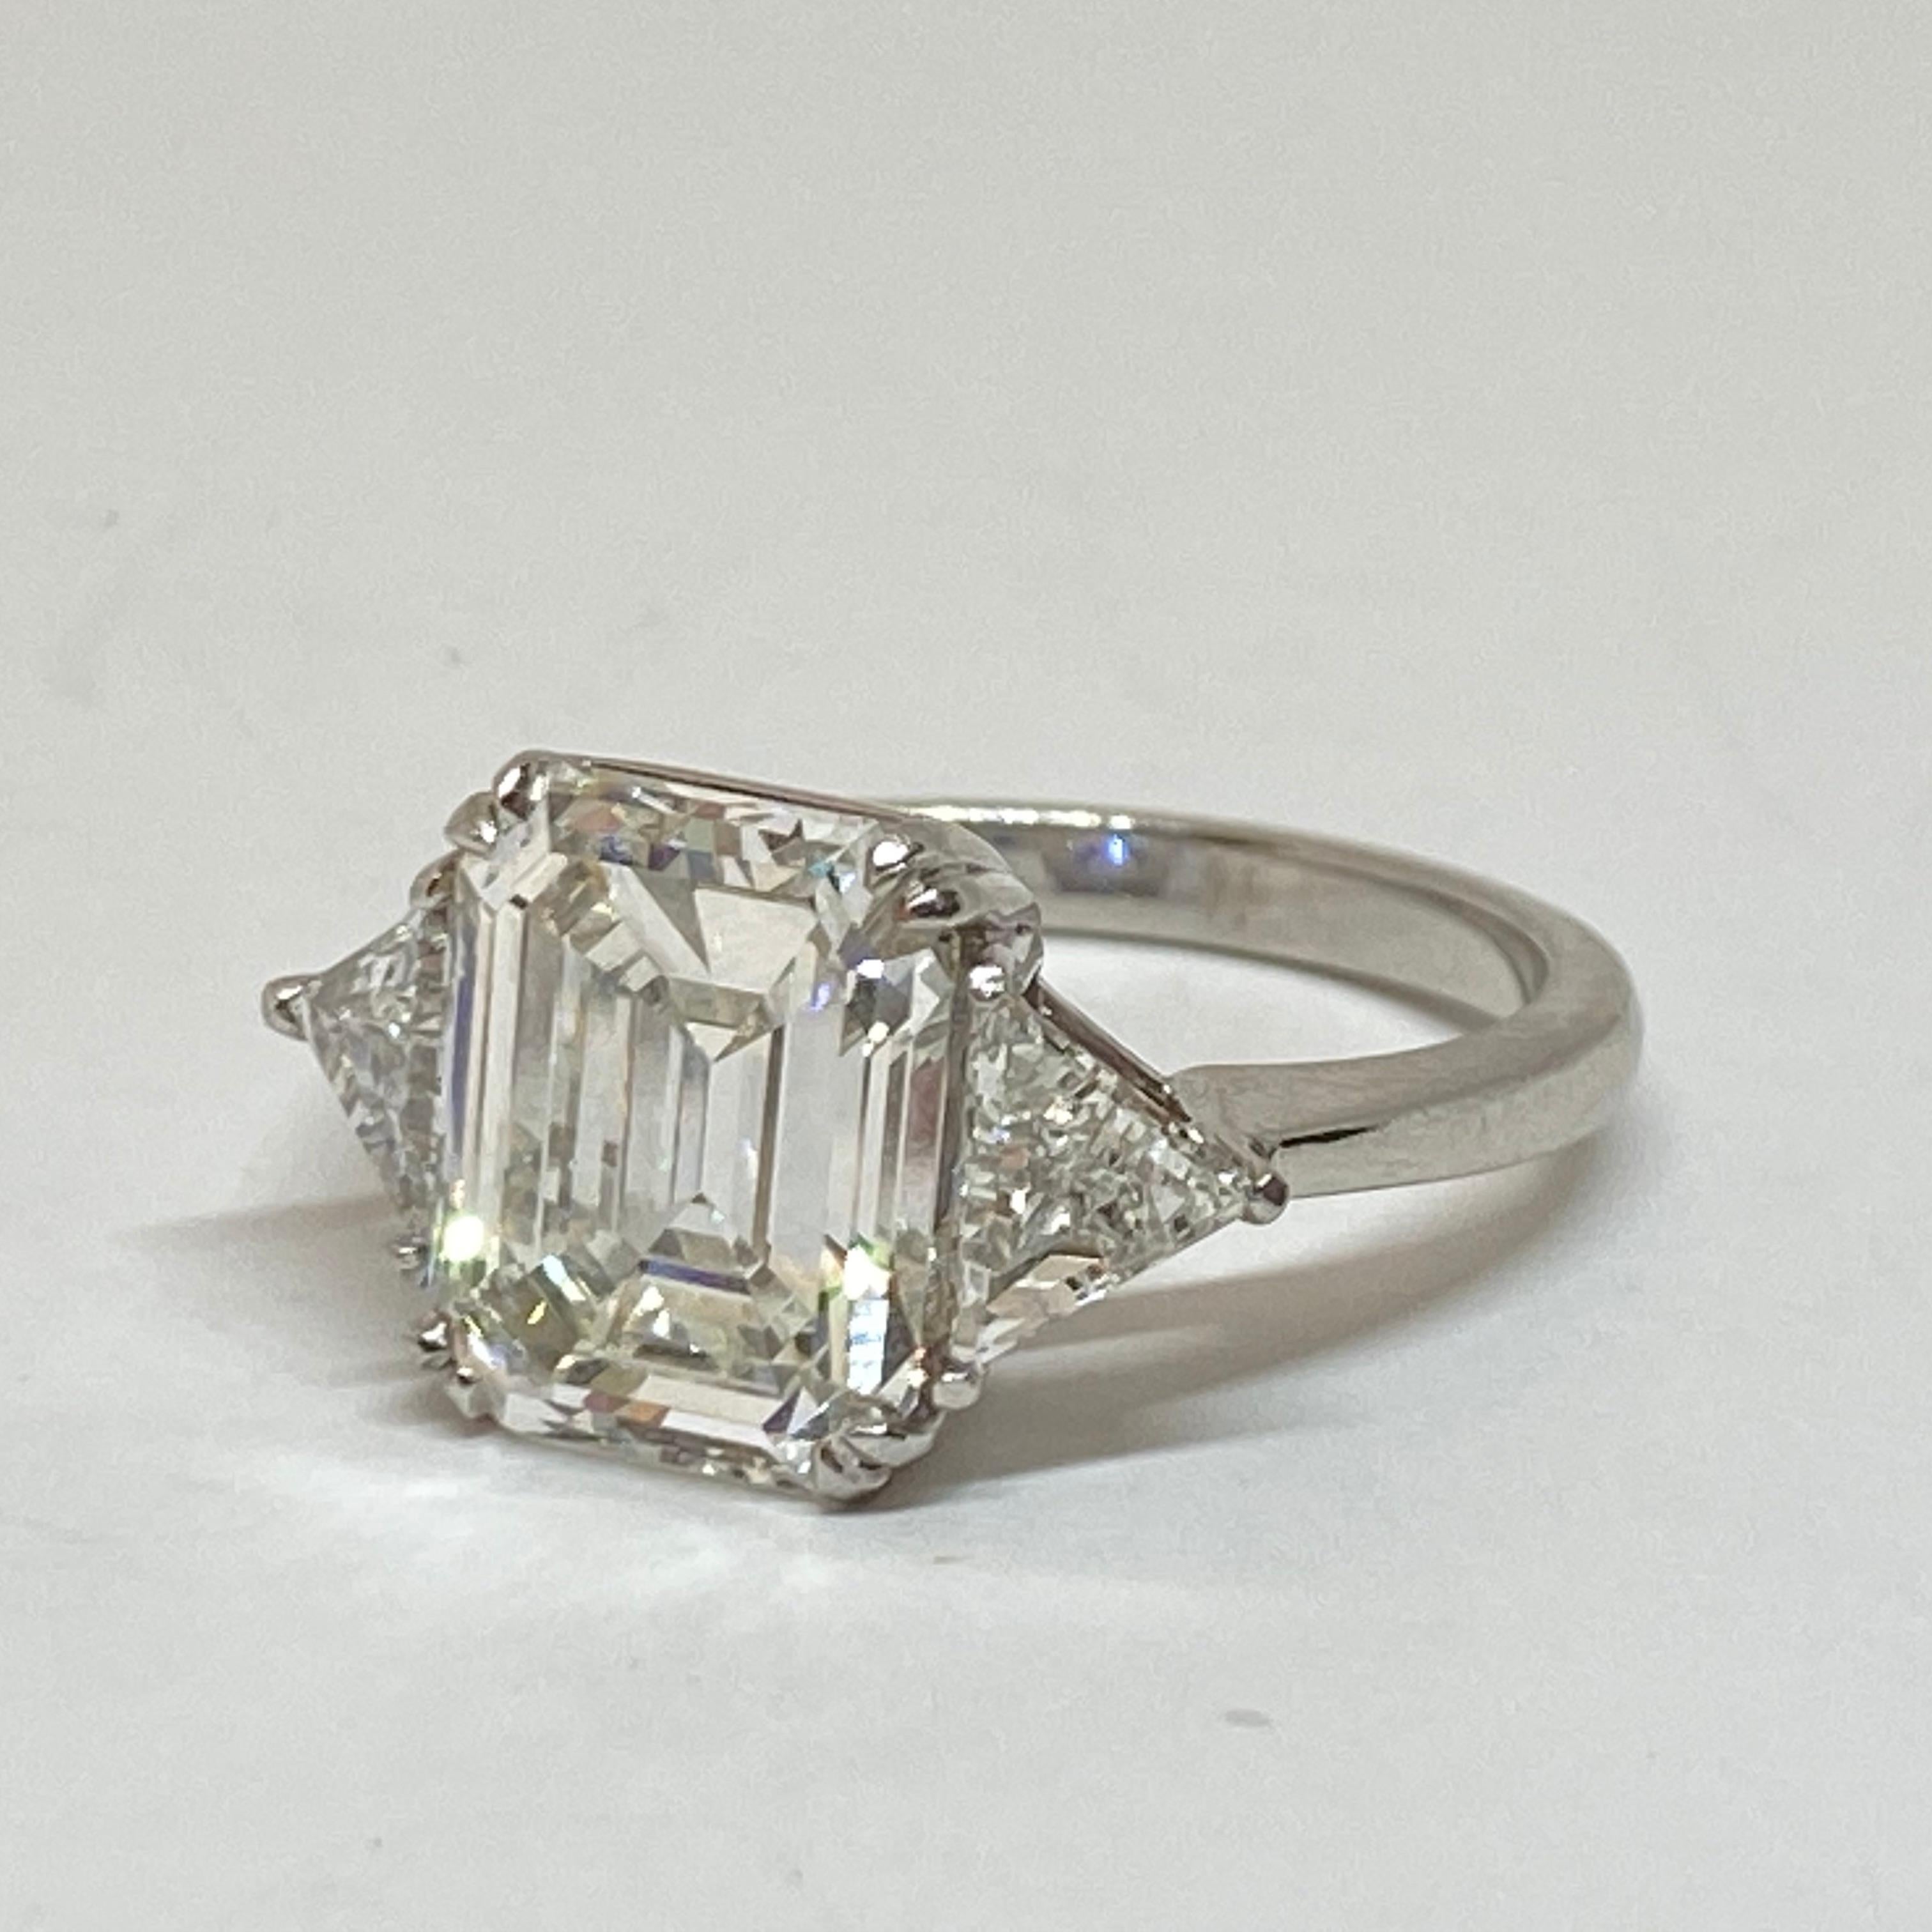 Beautiful three stone engagement ring designed in platinum and set with a stunning emerald cut diamond center and two trillian cut side diamonds that total .69 carats. Classic three stone ring can be sized upon request for any finger size. Comes